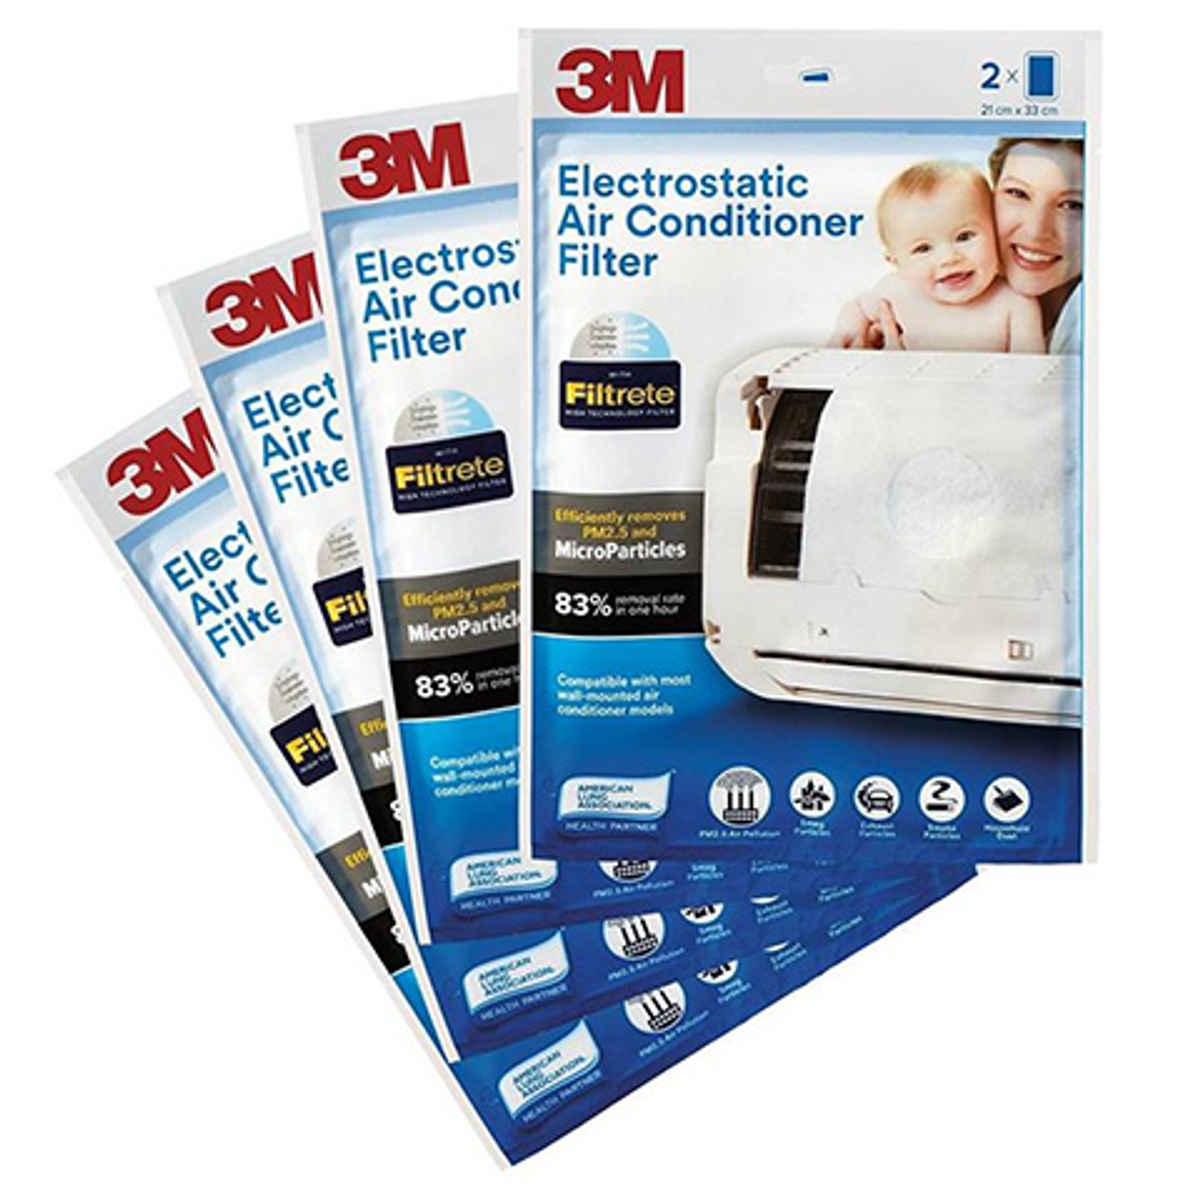 3M FILTRETE AIRCON CLEANING FILTER A/C DUST ELECTROSTATIC FIBERS 15X24" 2 PACKS